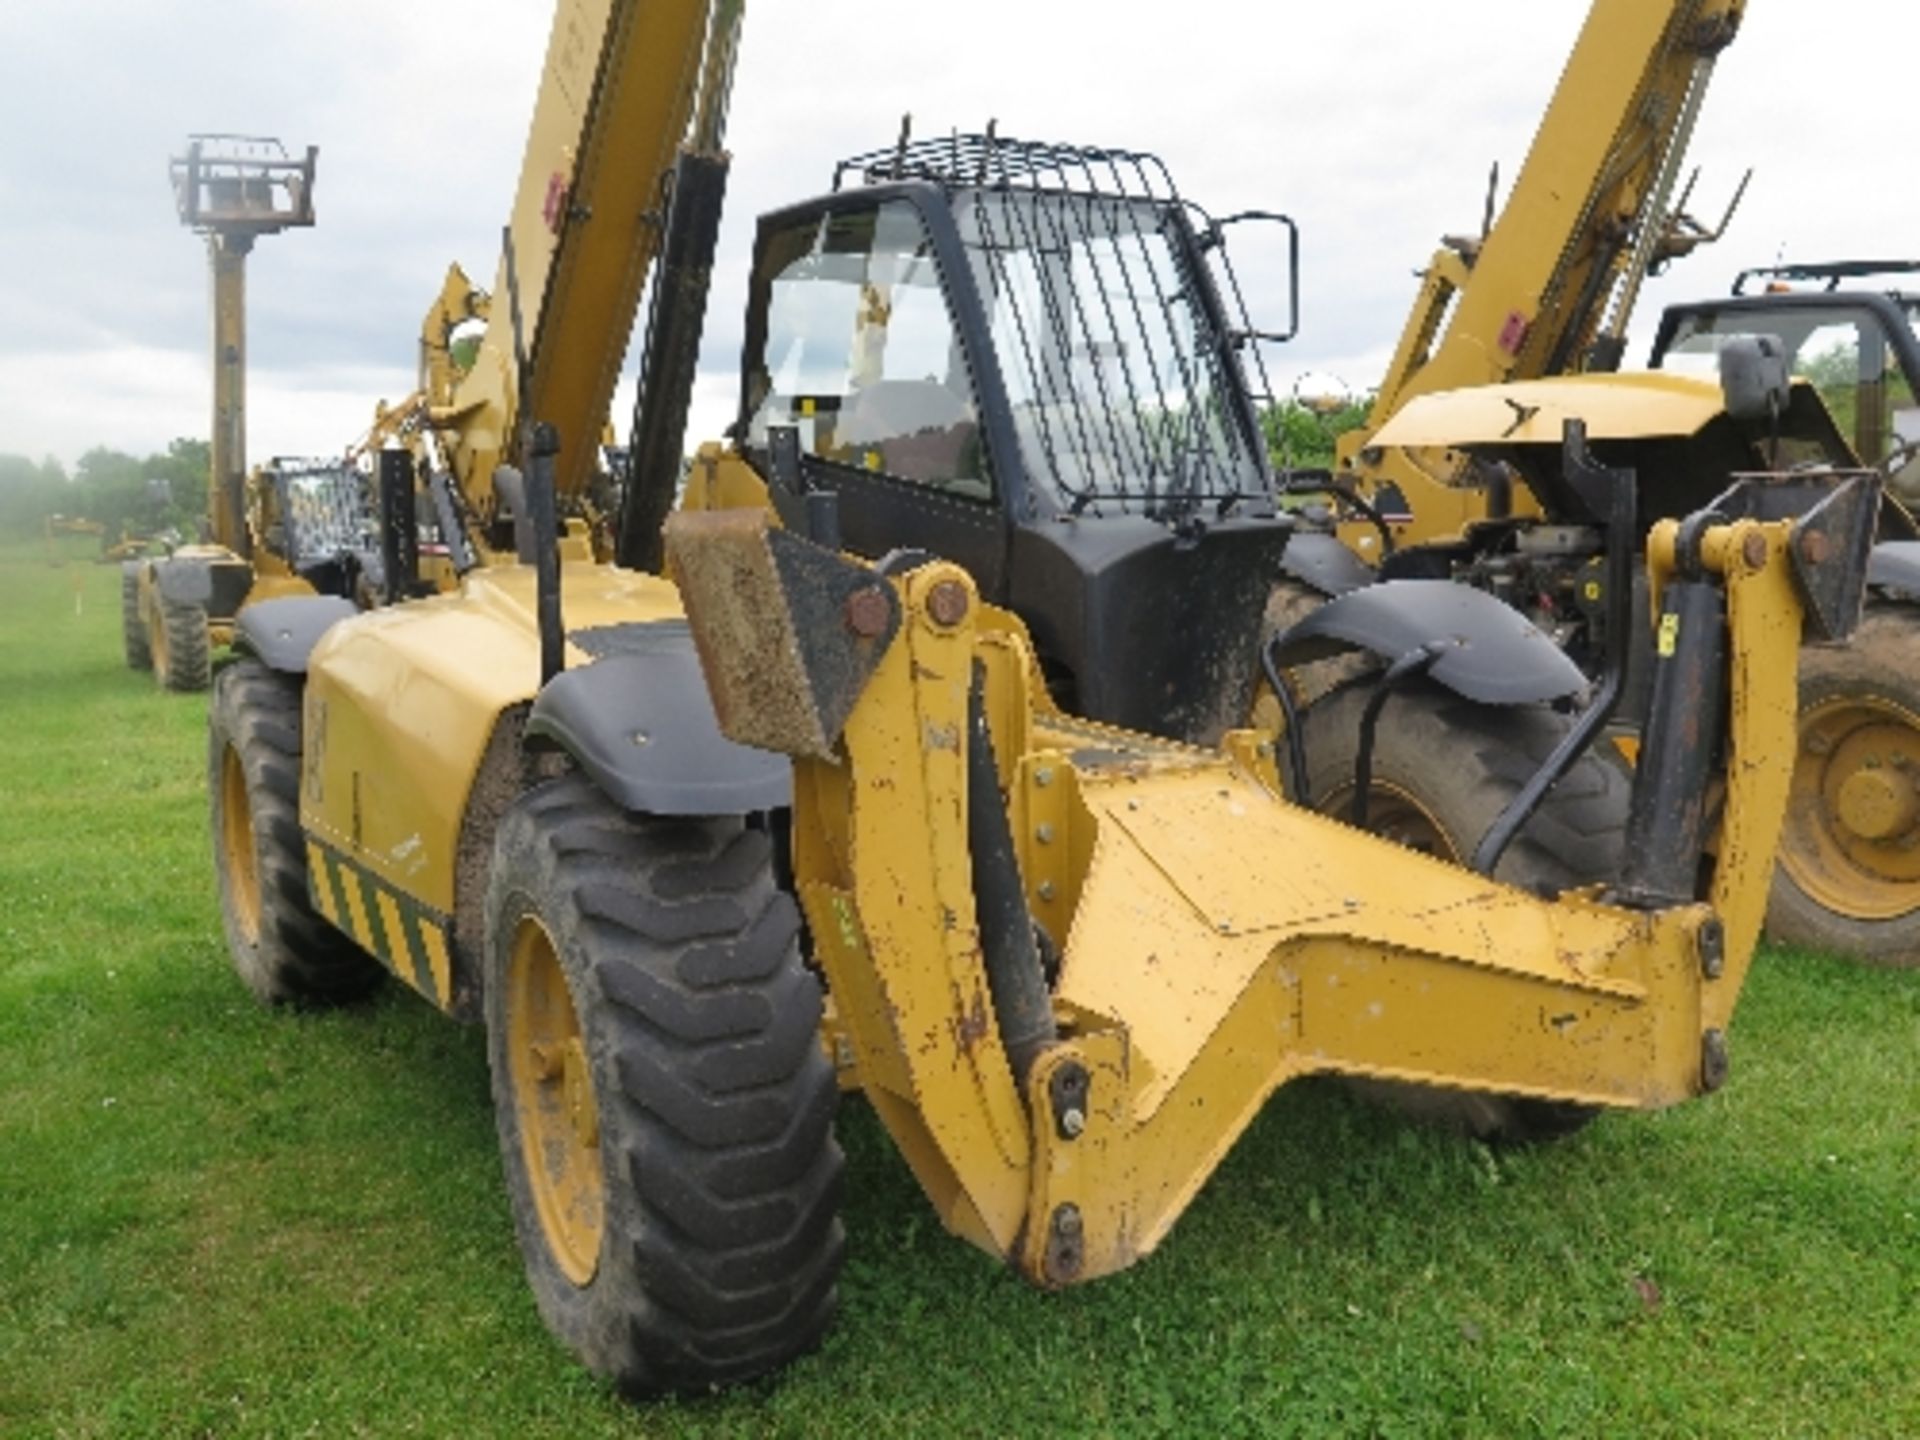 Caterpillar TH355B telehandler 2642 hrs 2005 136674
FORKS MISSING
ALL LOTS are SOLD AS SEEN - Image 2 of 9